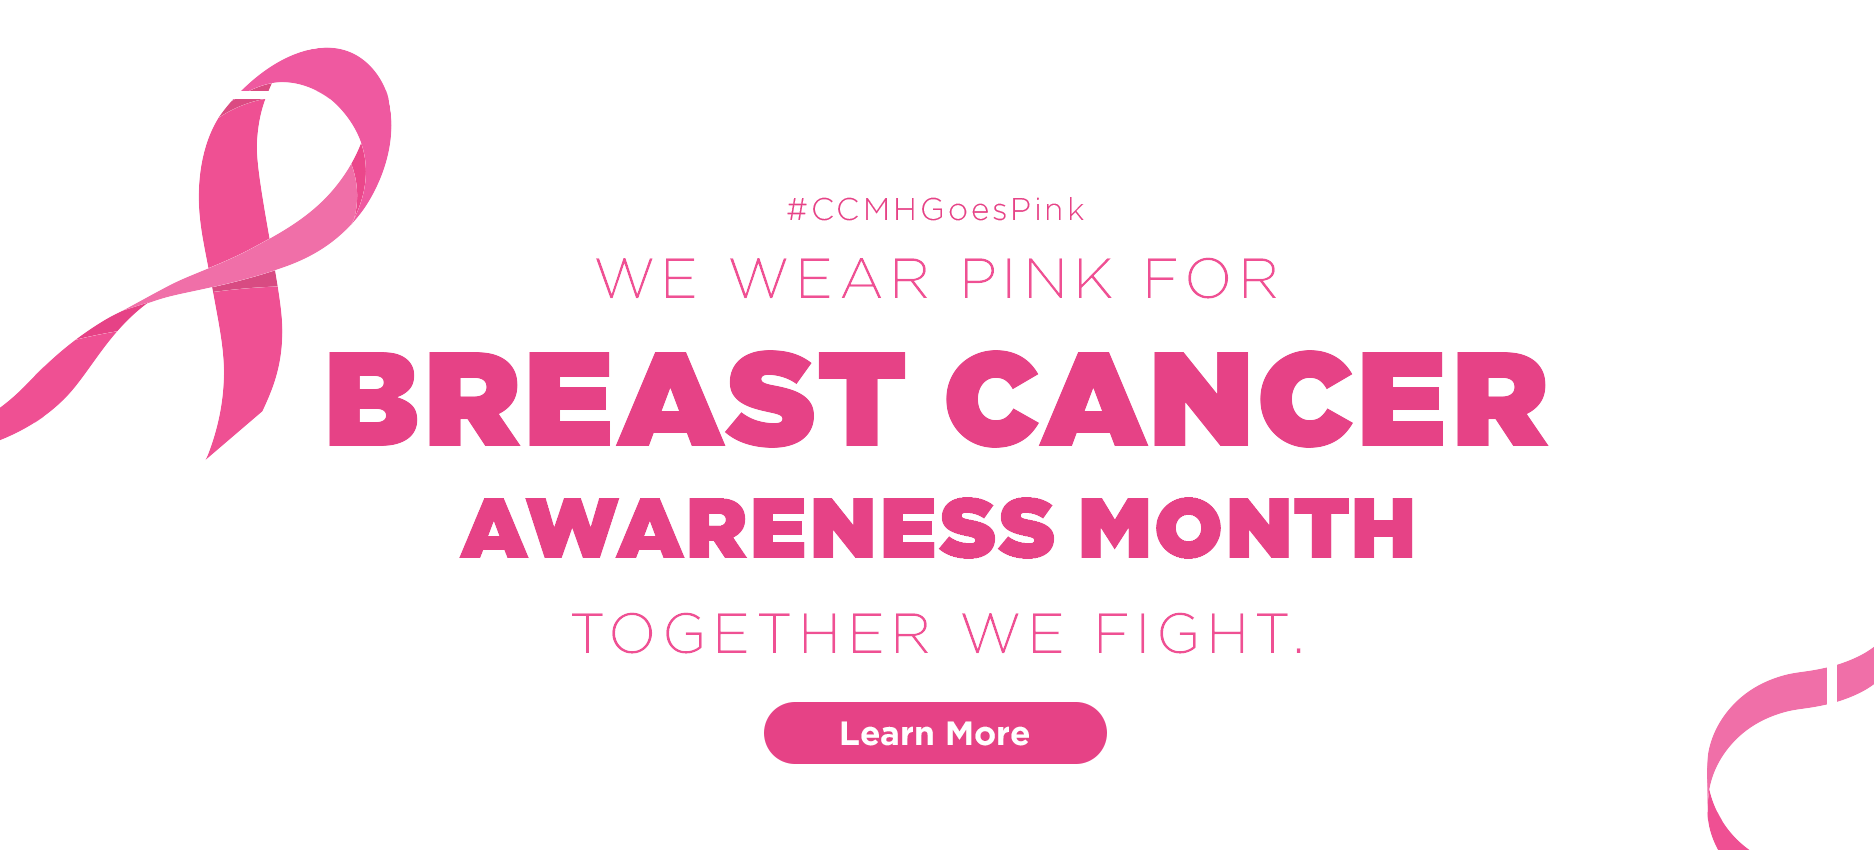 #CCMHGoesPink. We wear pink for breast cancer awareness month. Together we fight. Click for more information.